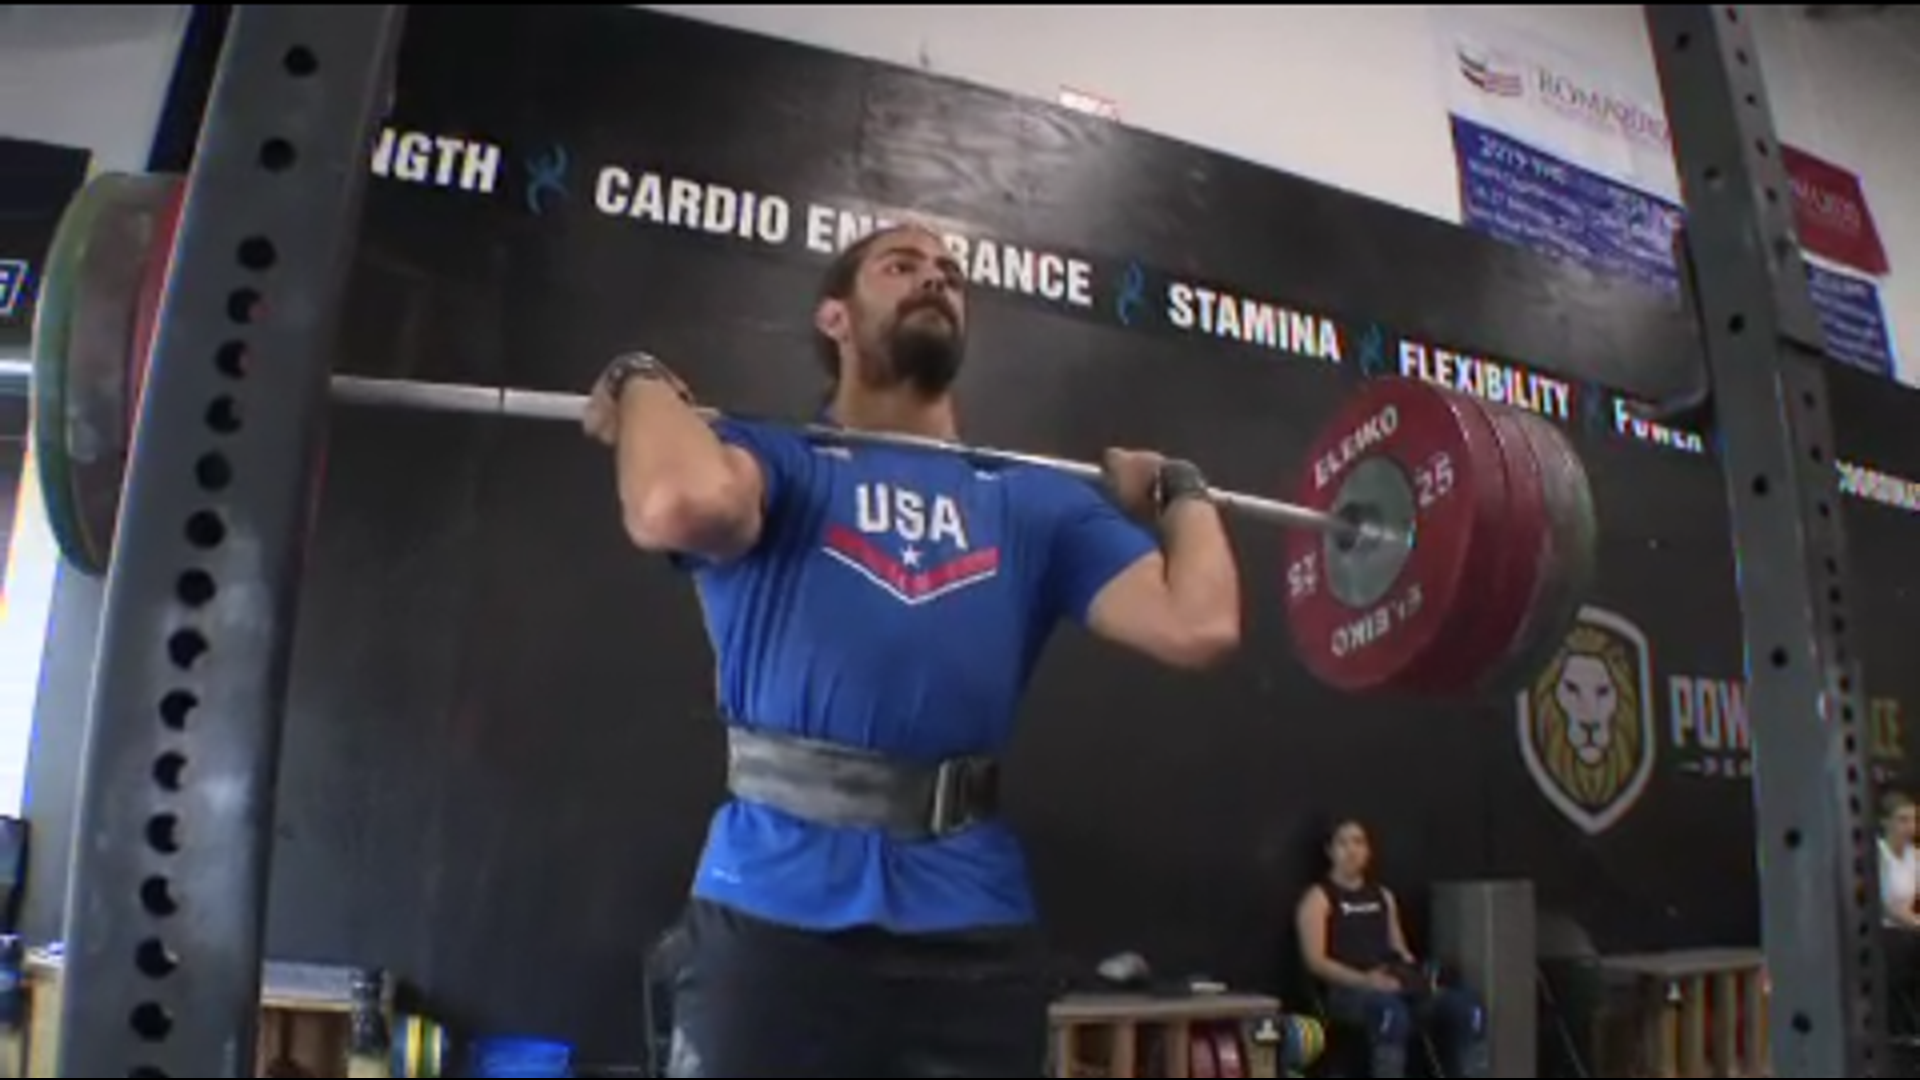 Olympian Harrison Maurus has spent the last decade weightlifting and training his body, but underneath the 177 pounds of muscle, there's a trained gymnast.